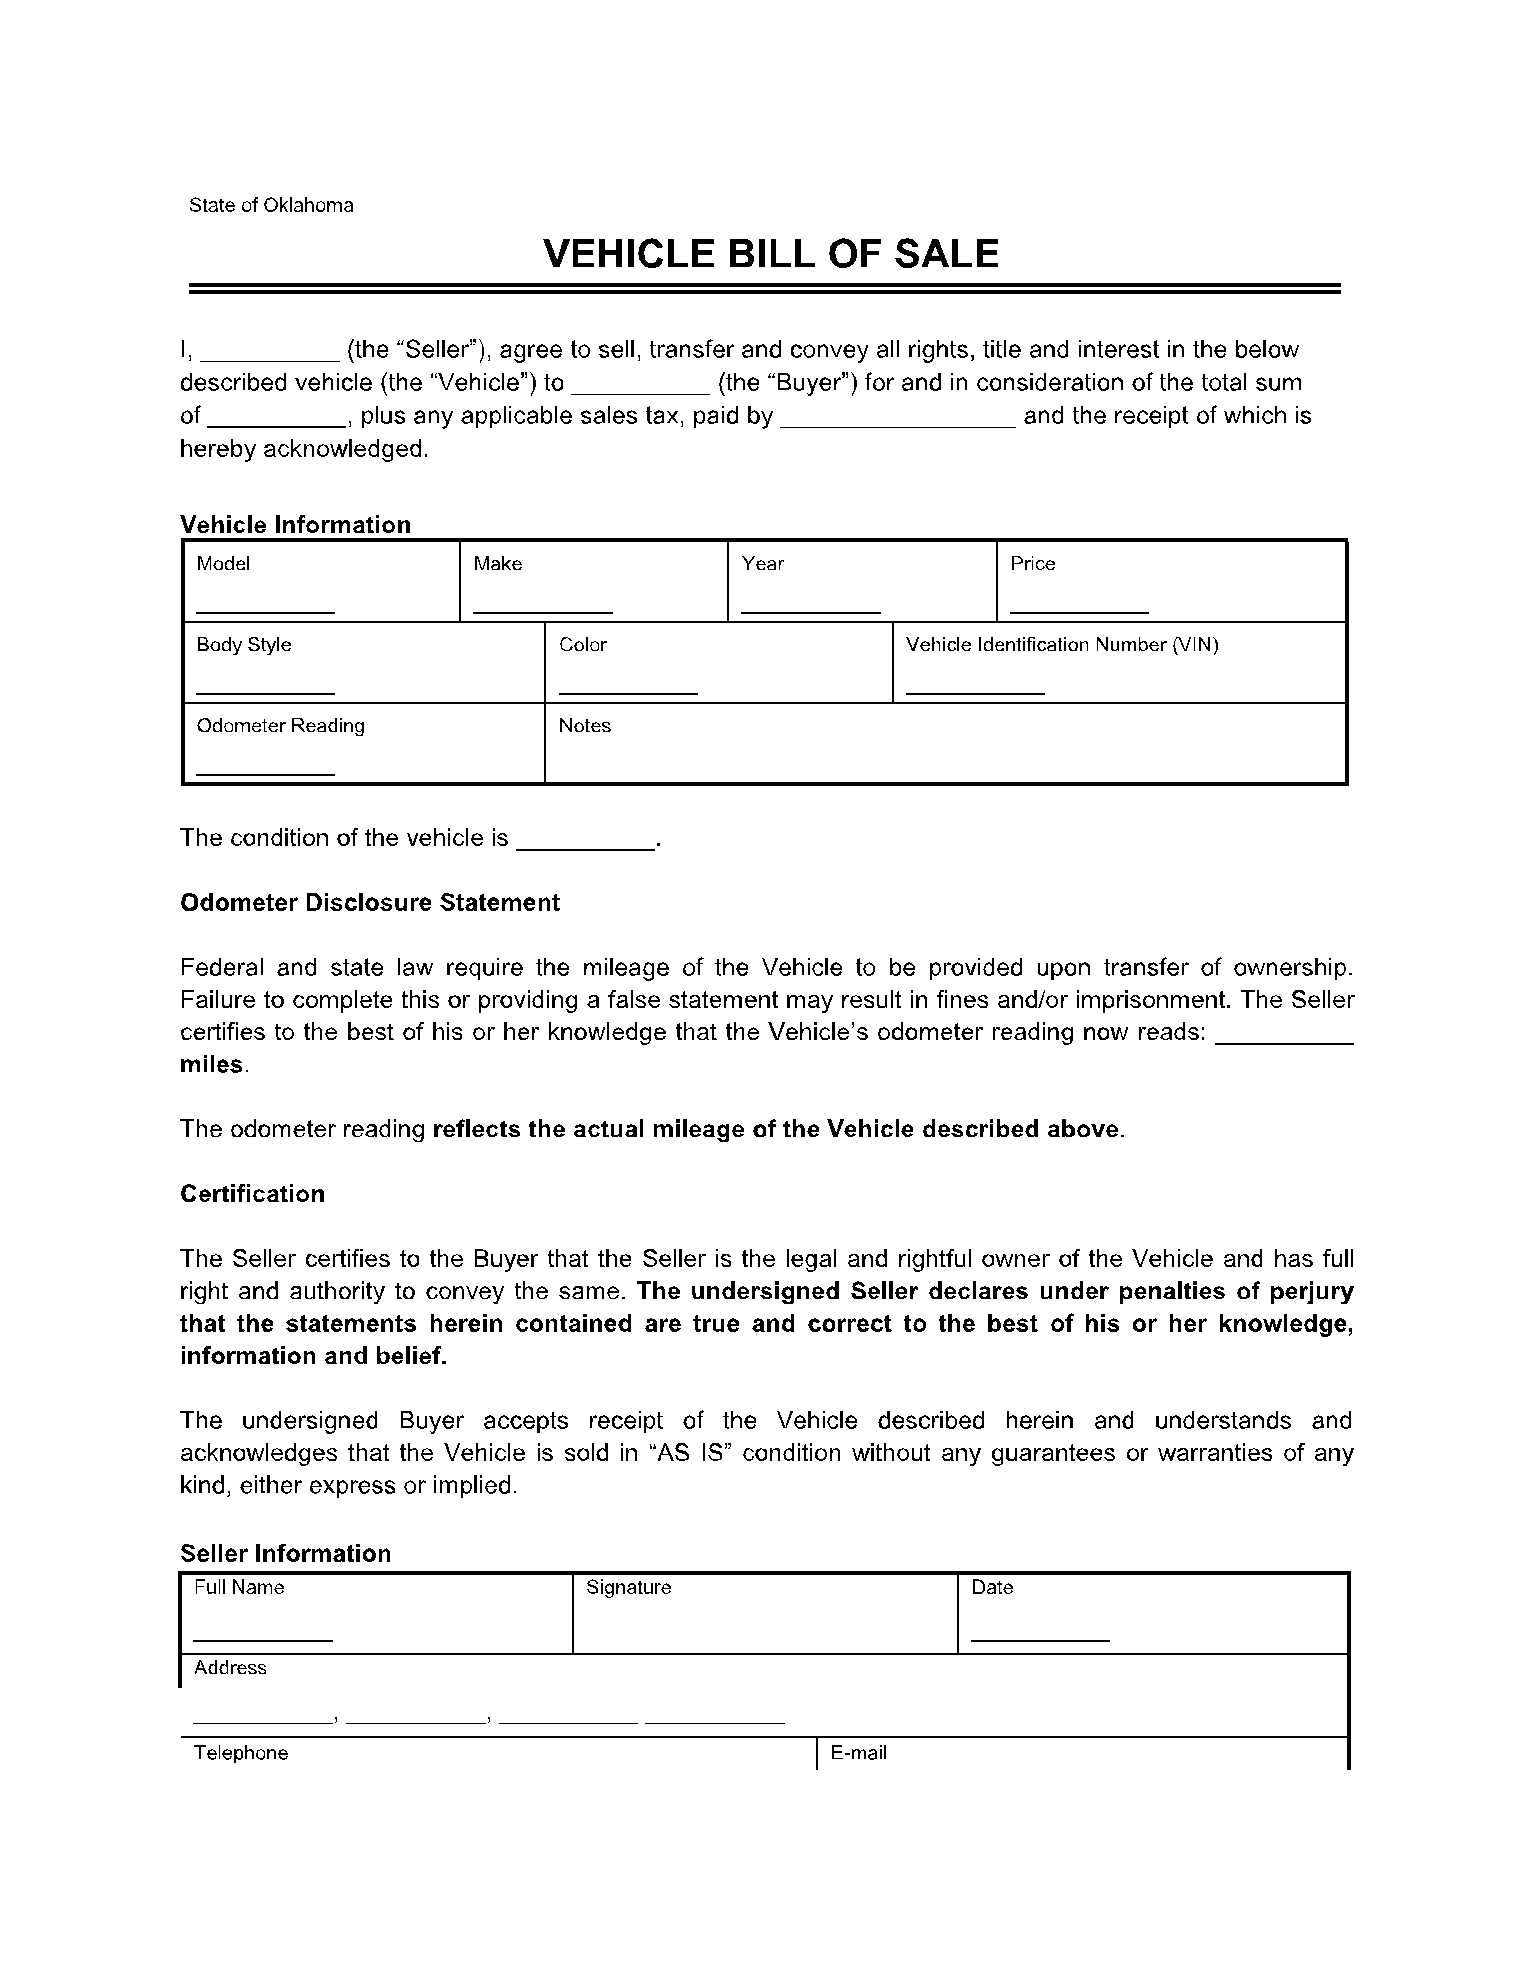 Vehicle Bill of Sale Forms in Oklahoma